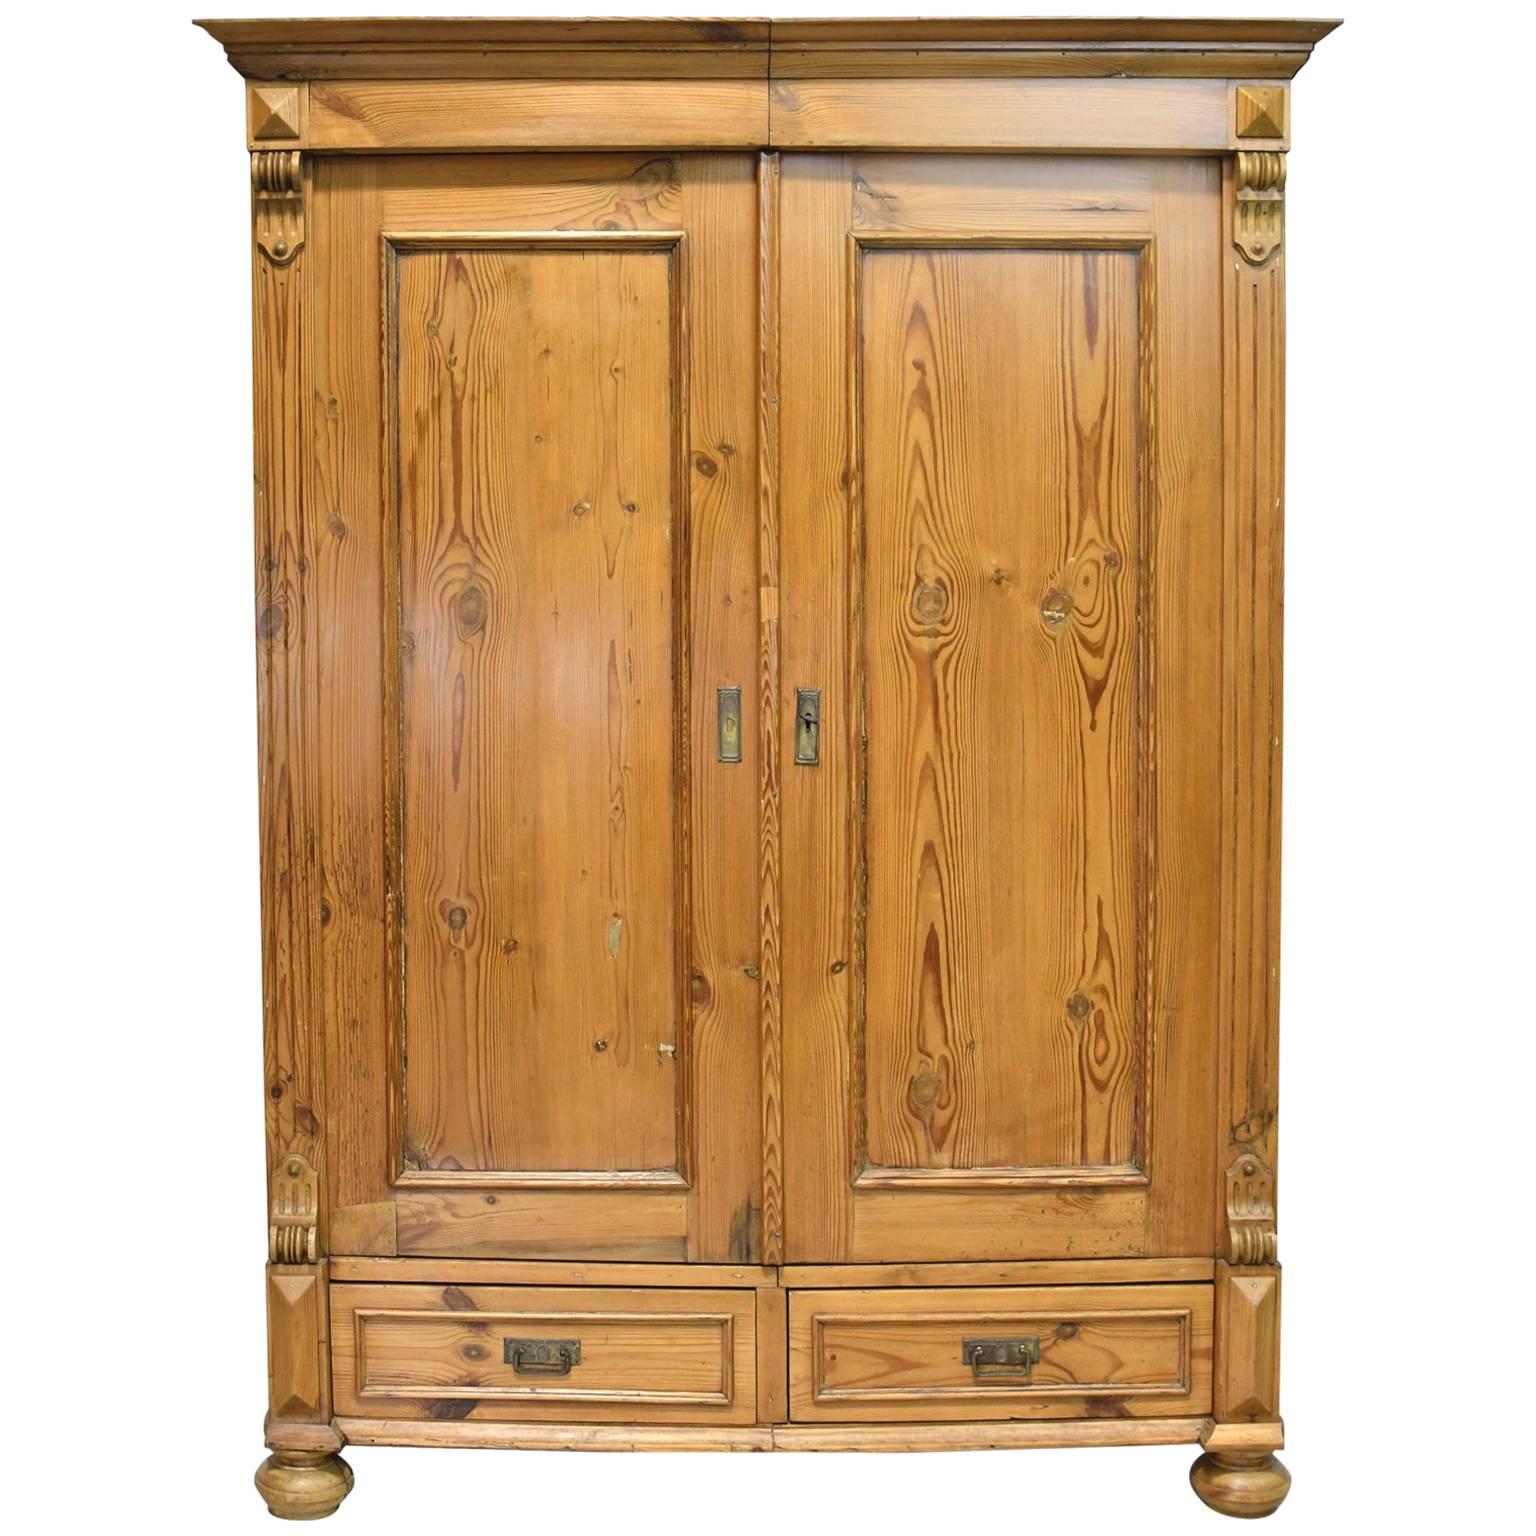 19th Century Two-Door European Armoire in Pine with Two Drawers and Shelves